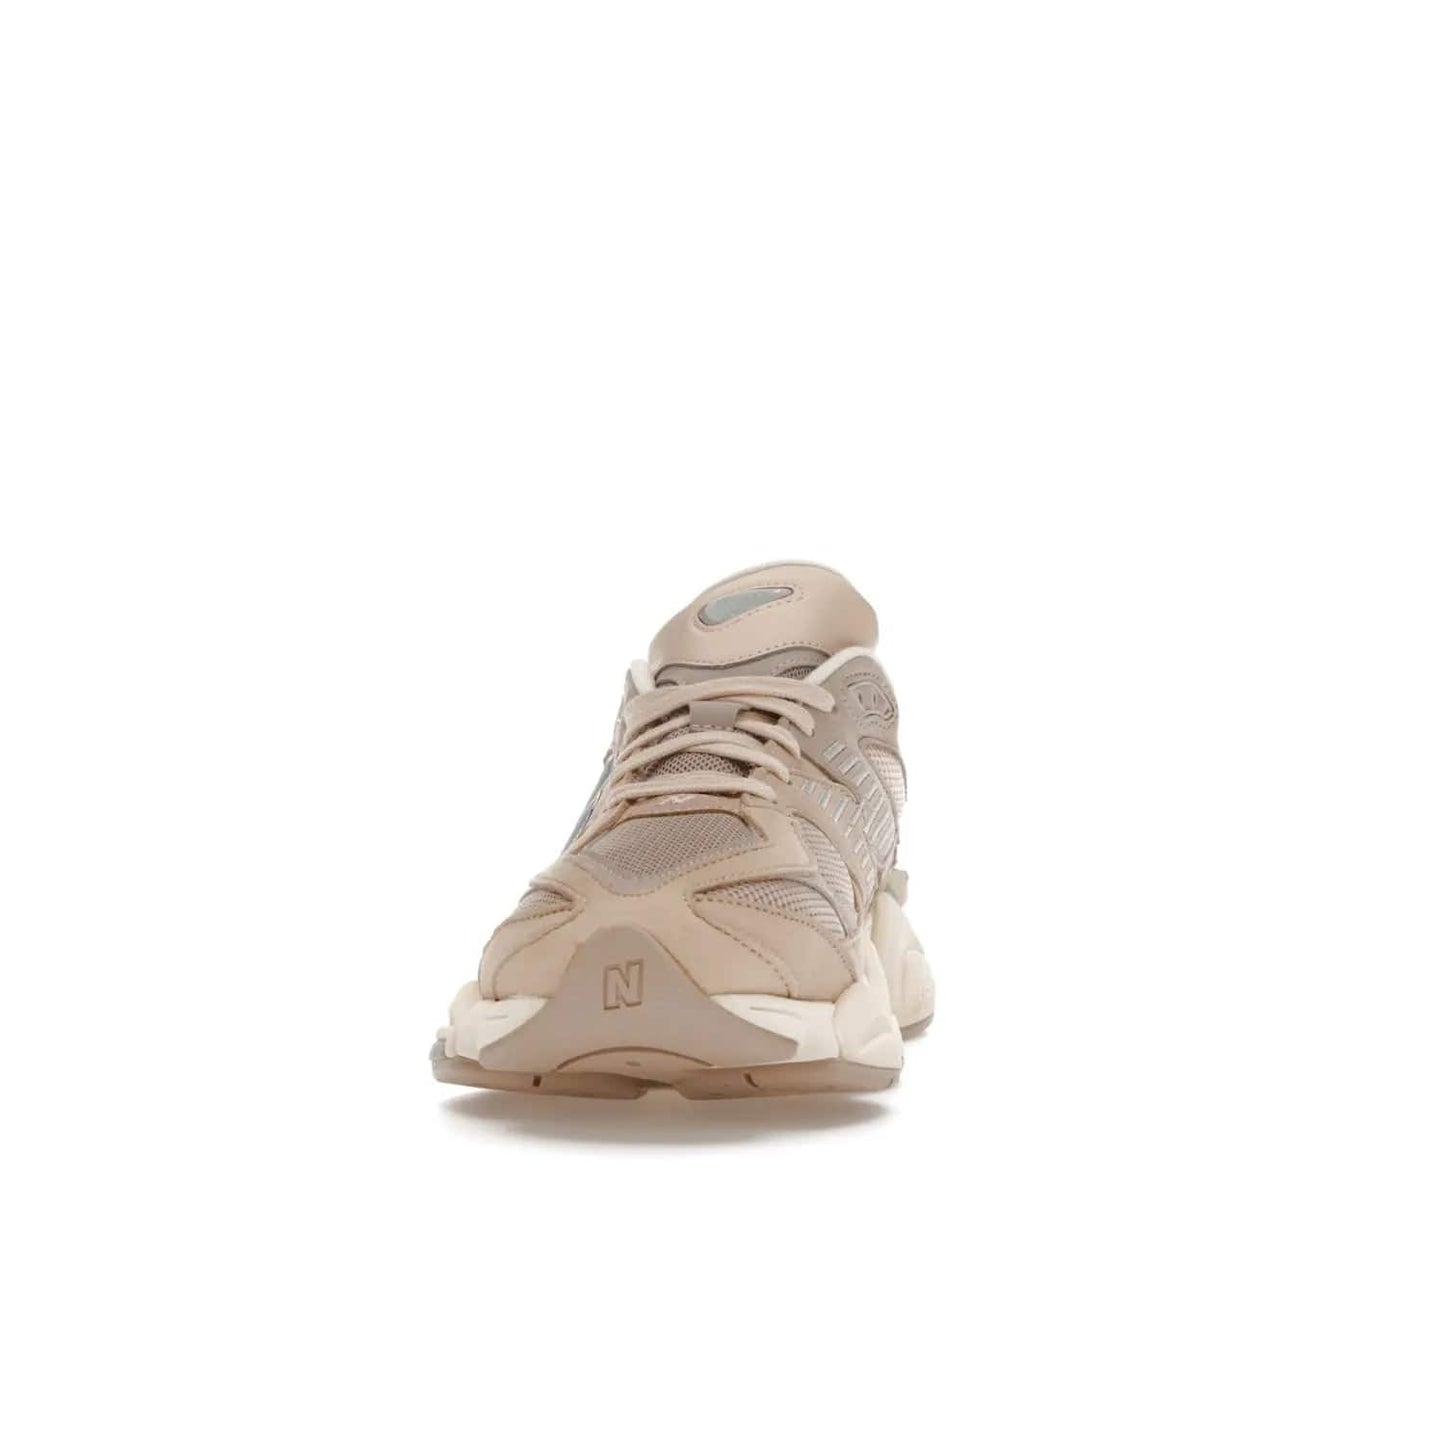 New Balance 9060 Ivory Cream Pink Sand - Image 11 - Only at www.BallersClubKickz.com - New Balance 9060 Ivory Cream Pink Sand - Sleek meshed upper, premium suede overlays, ABZORB cushioning. Get this unique sneaker ahead of the trend, launching December 6th, 2022!